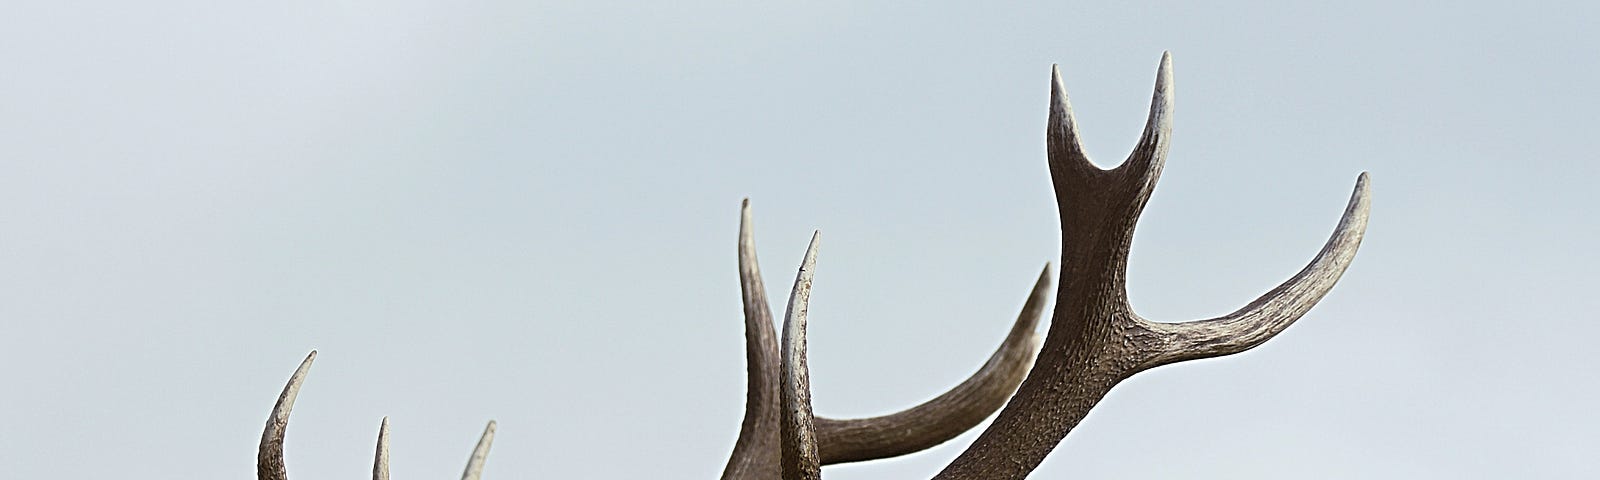 A pair of antlers with many points in front of blue sky